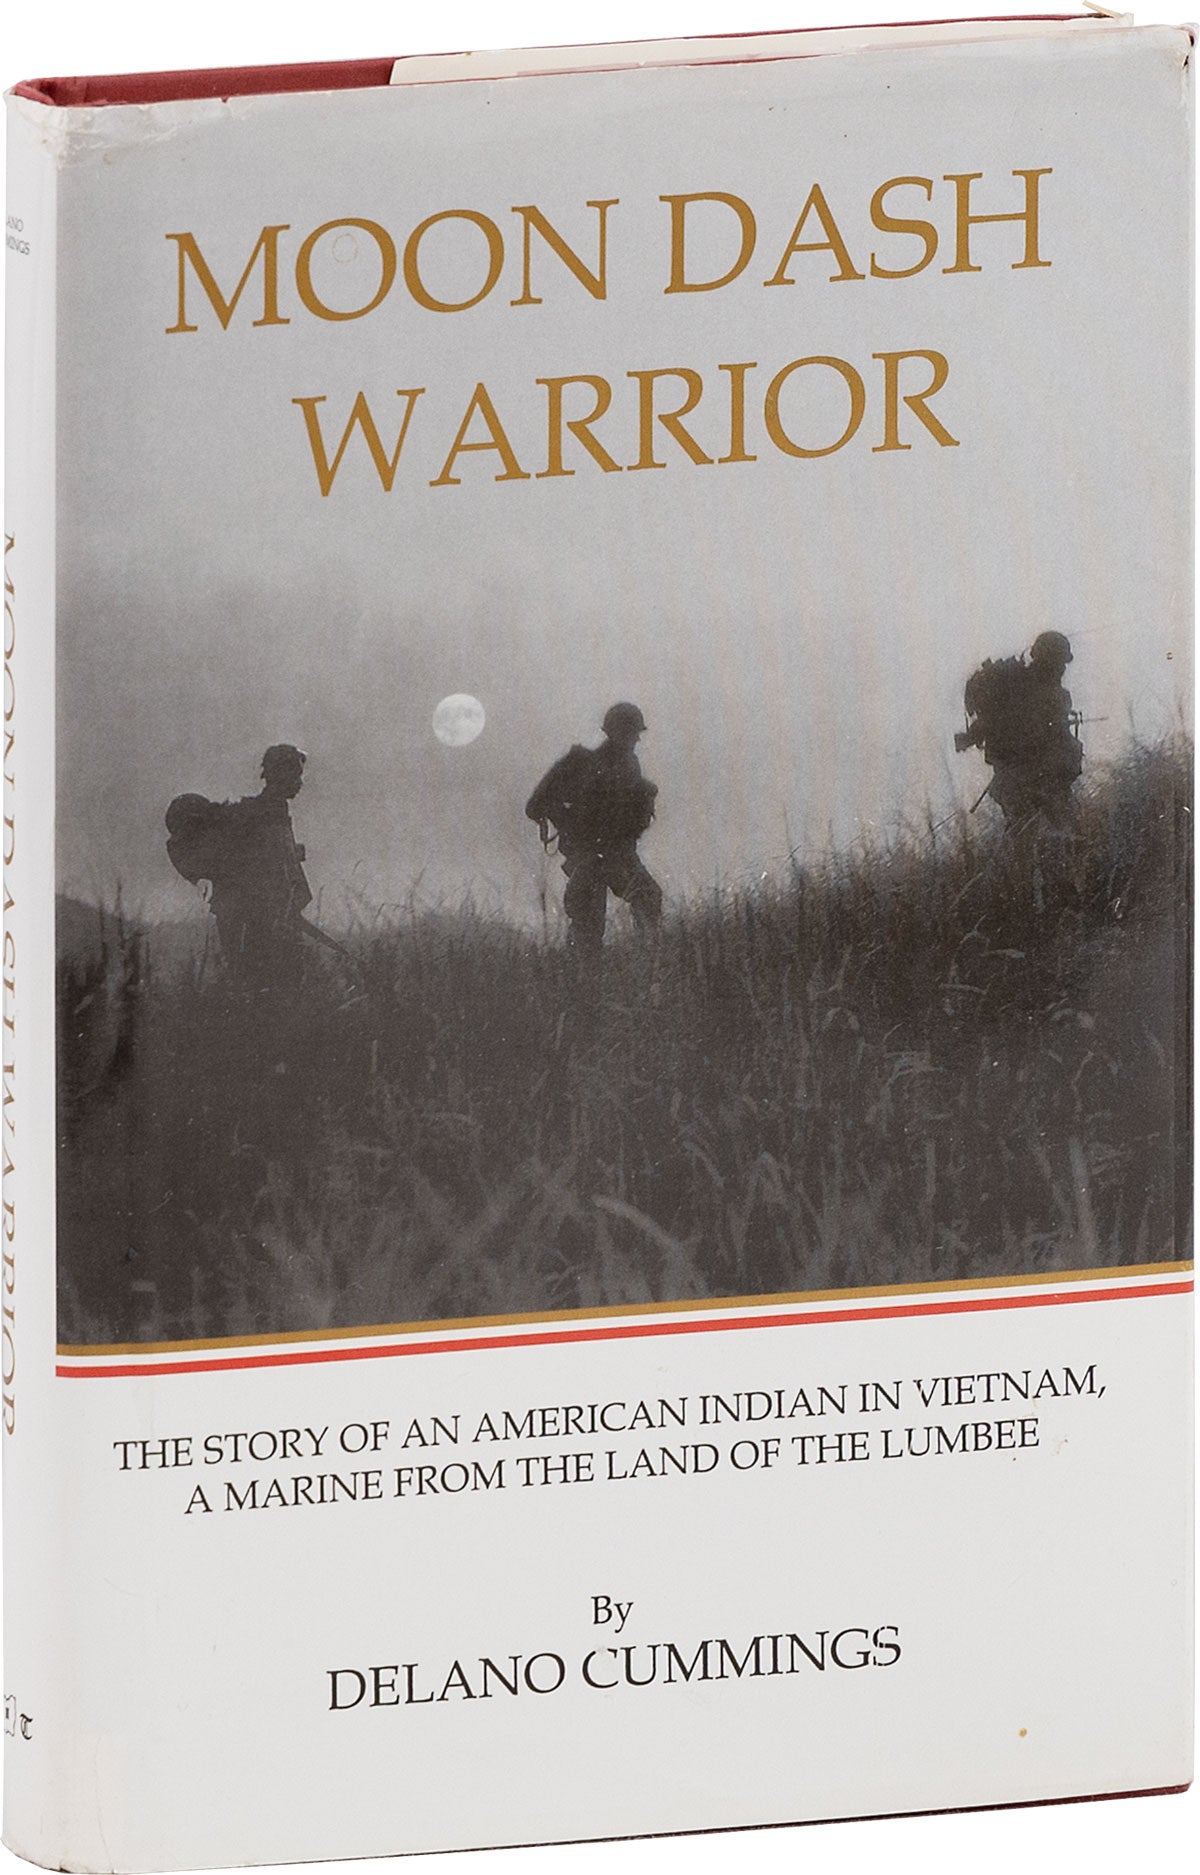 [Item #80744] Moon Dash Warrior; The Story of an American Indian in Vietnam, A Marine from the Land of the Lumbee. Delano CUMMINGS.